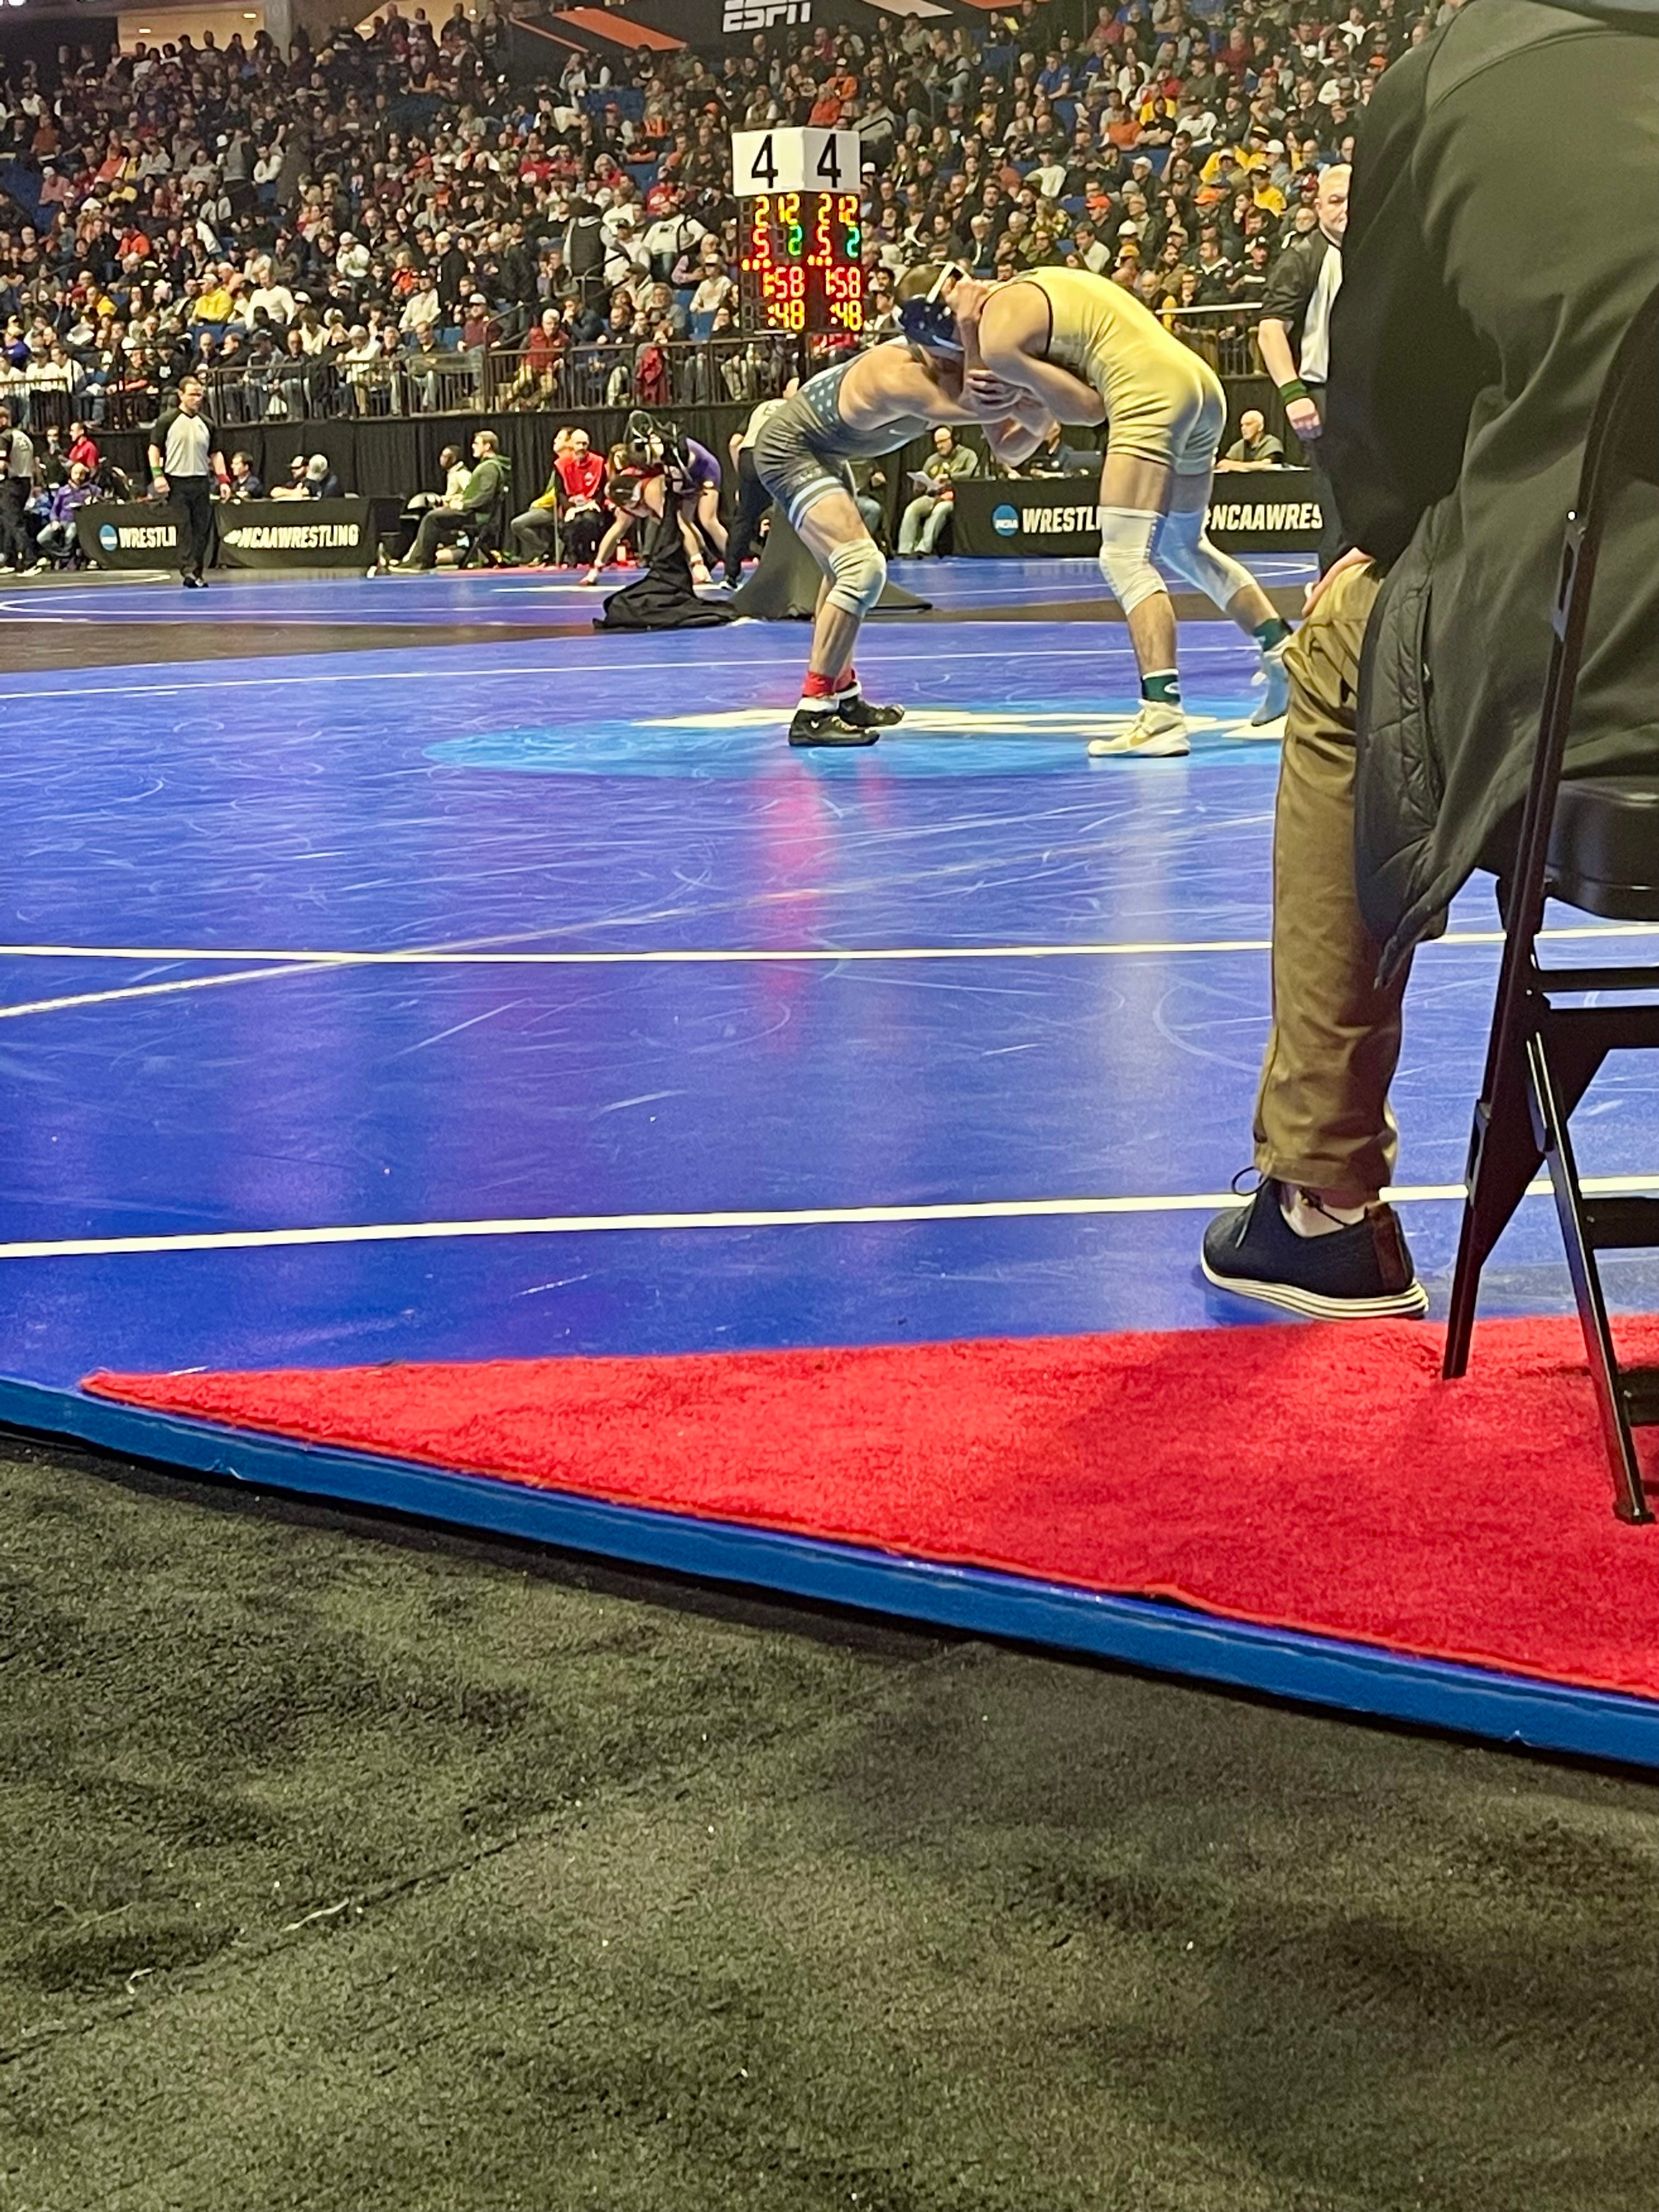 Carpet Corners - Protecting Wrestling Mats from Chair Impressions